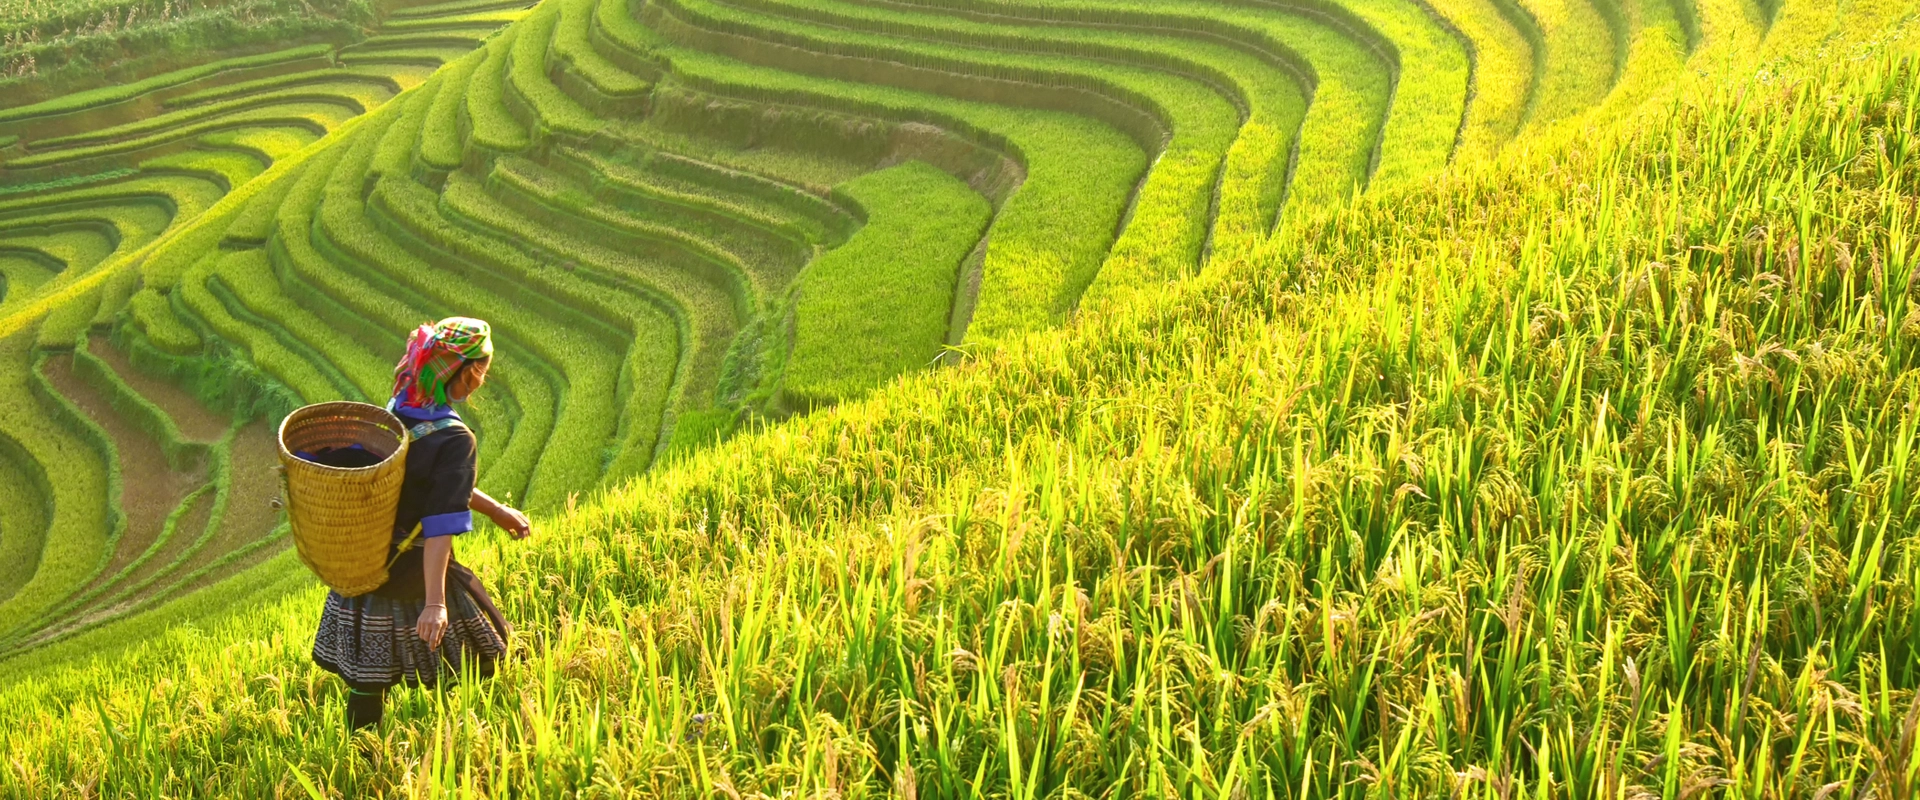 voyage luxe vietnam mu cang chai riziere agriculture